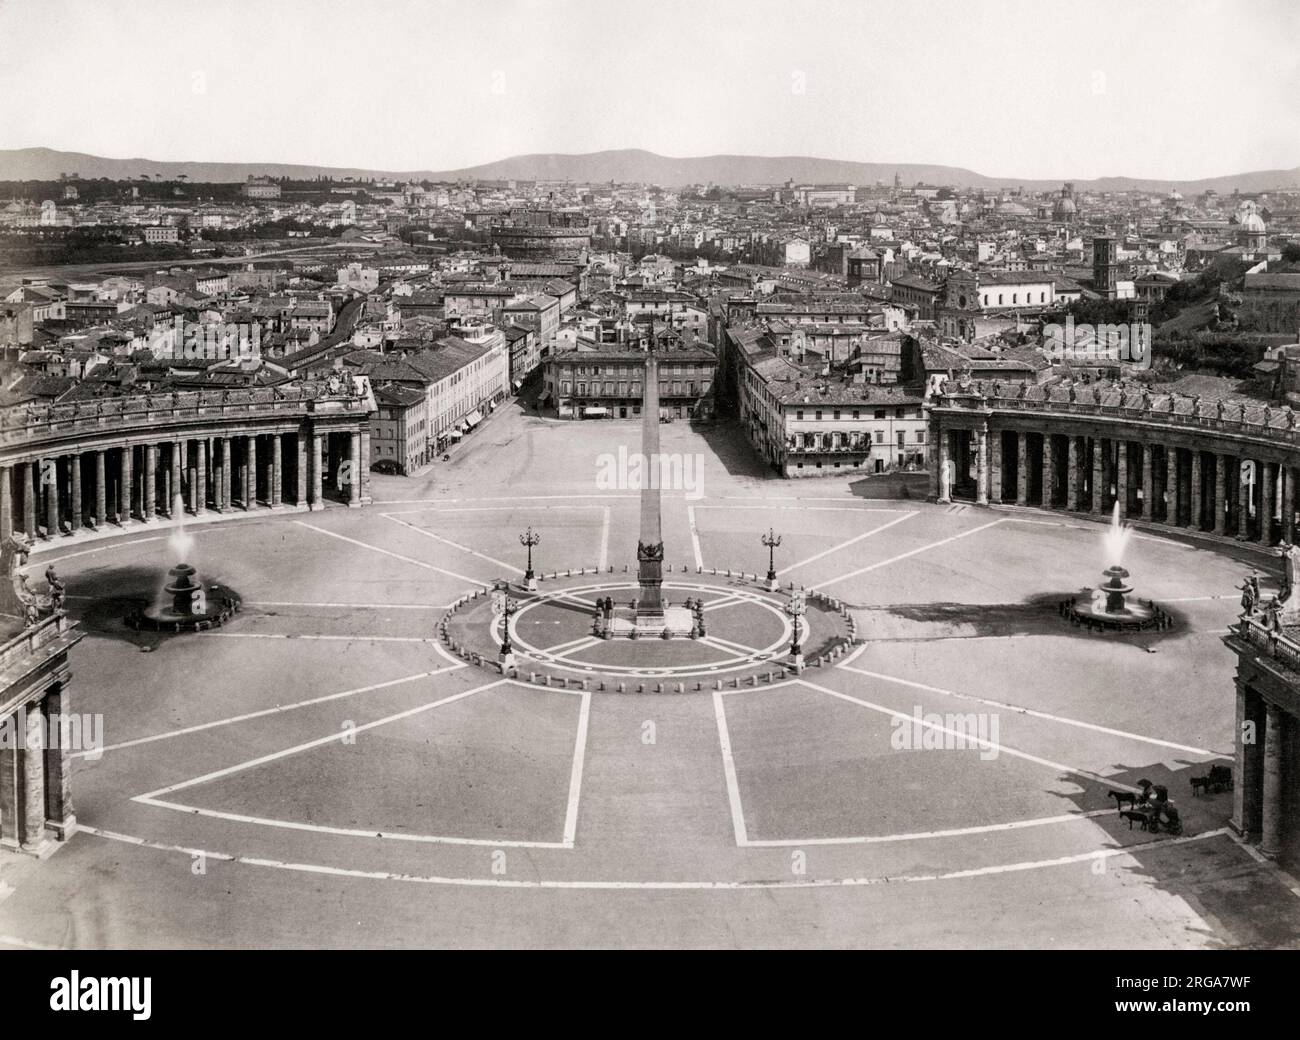 Statue and fountains in the middle of St Peter's Square, the Vatican, Rome, Italy. Vintage 19th century photograph. Stock Photo